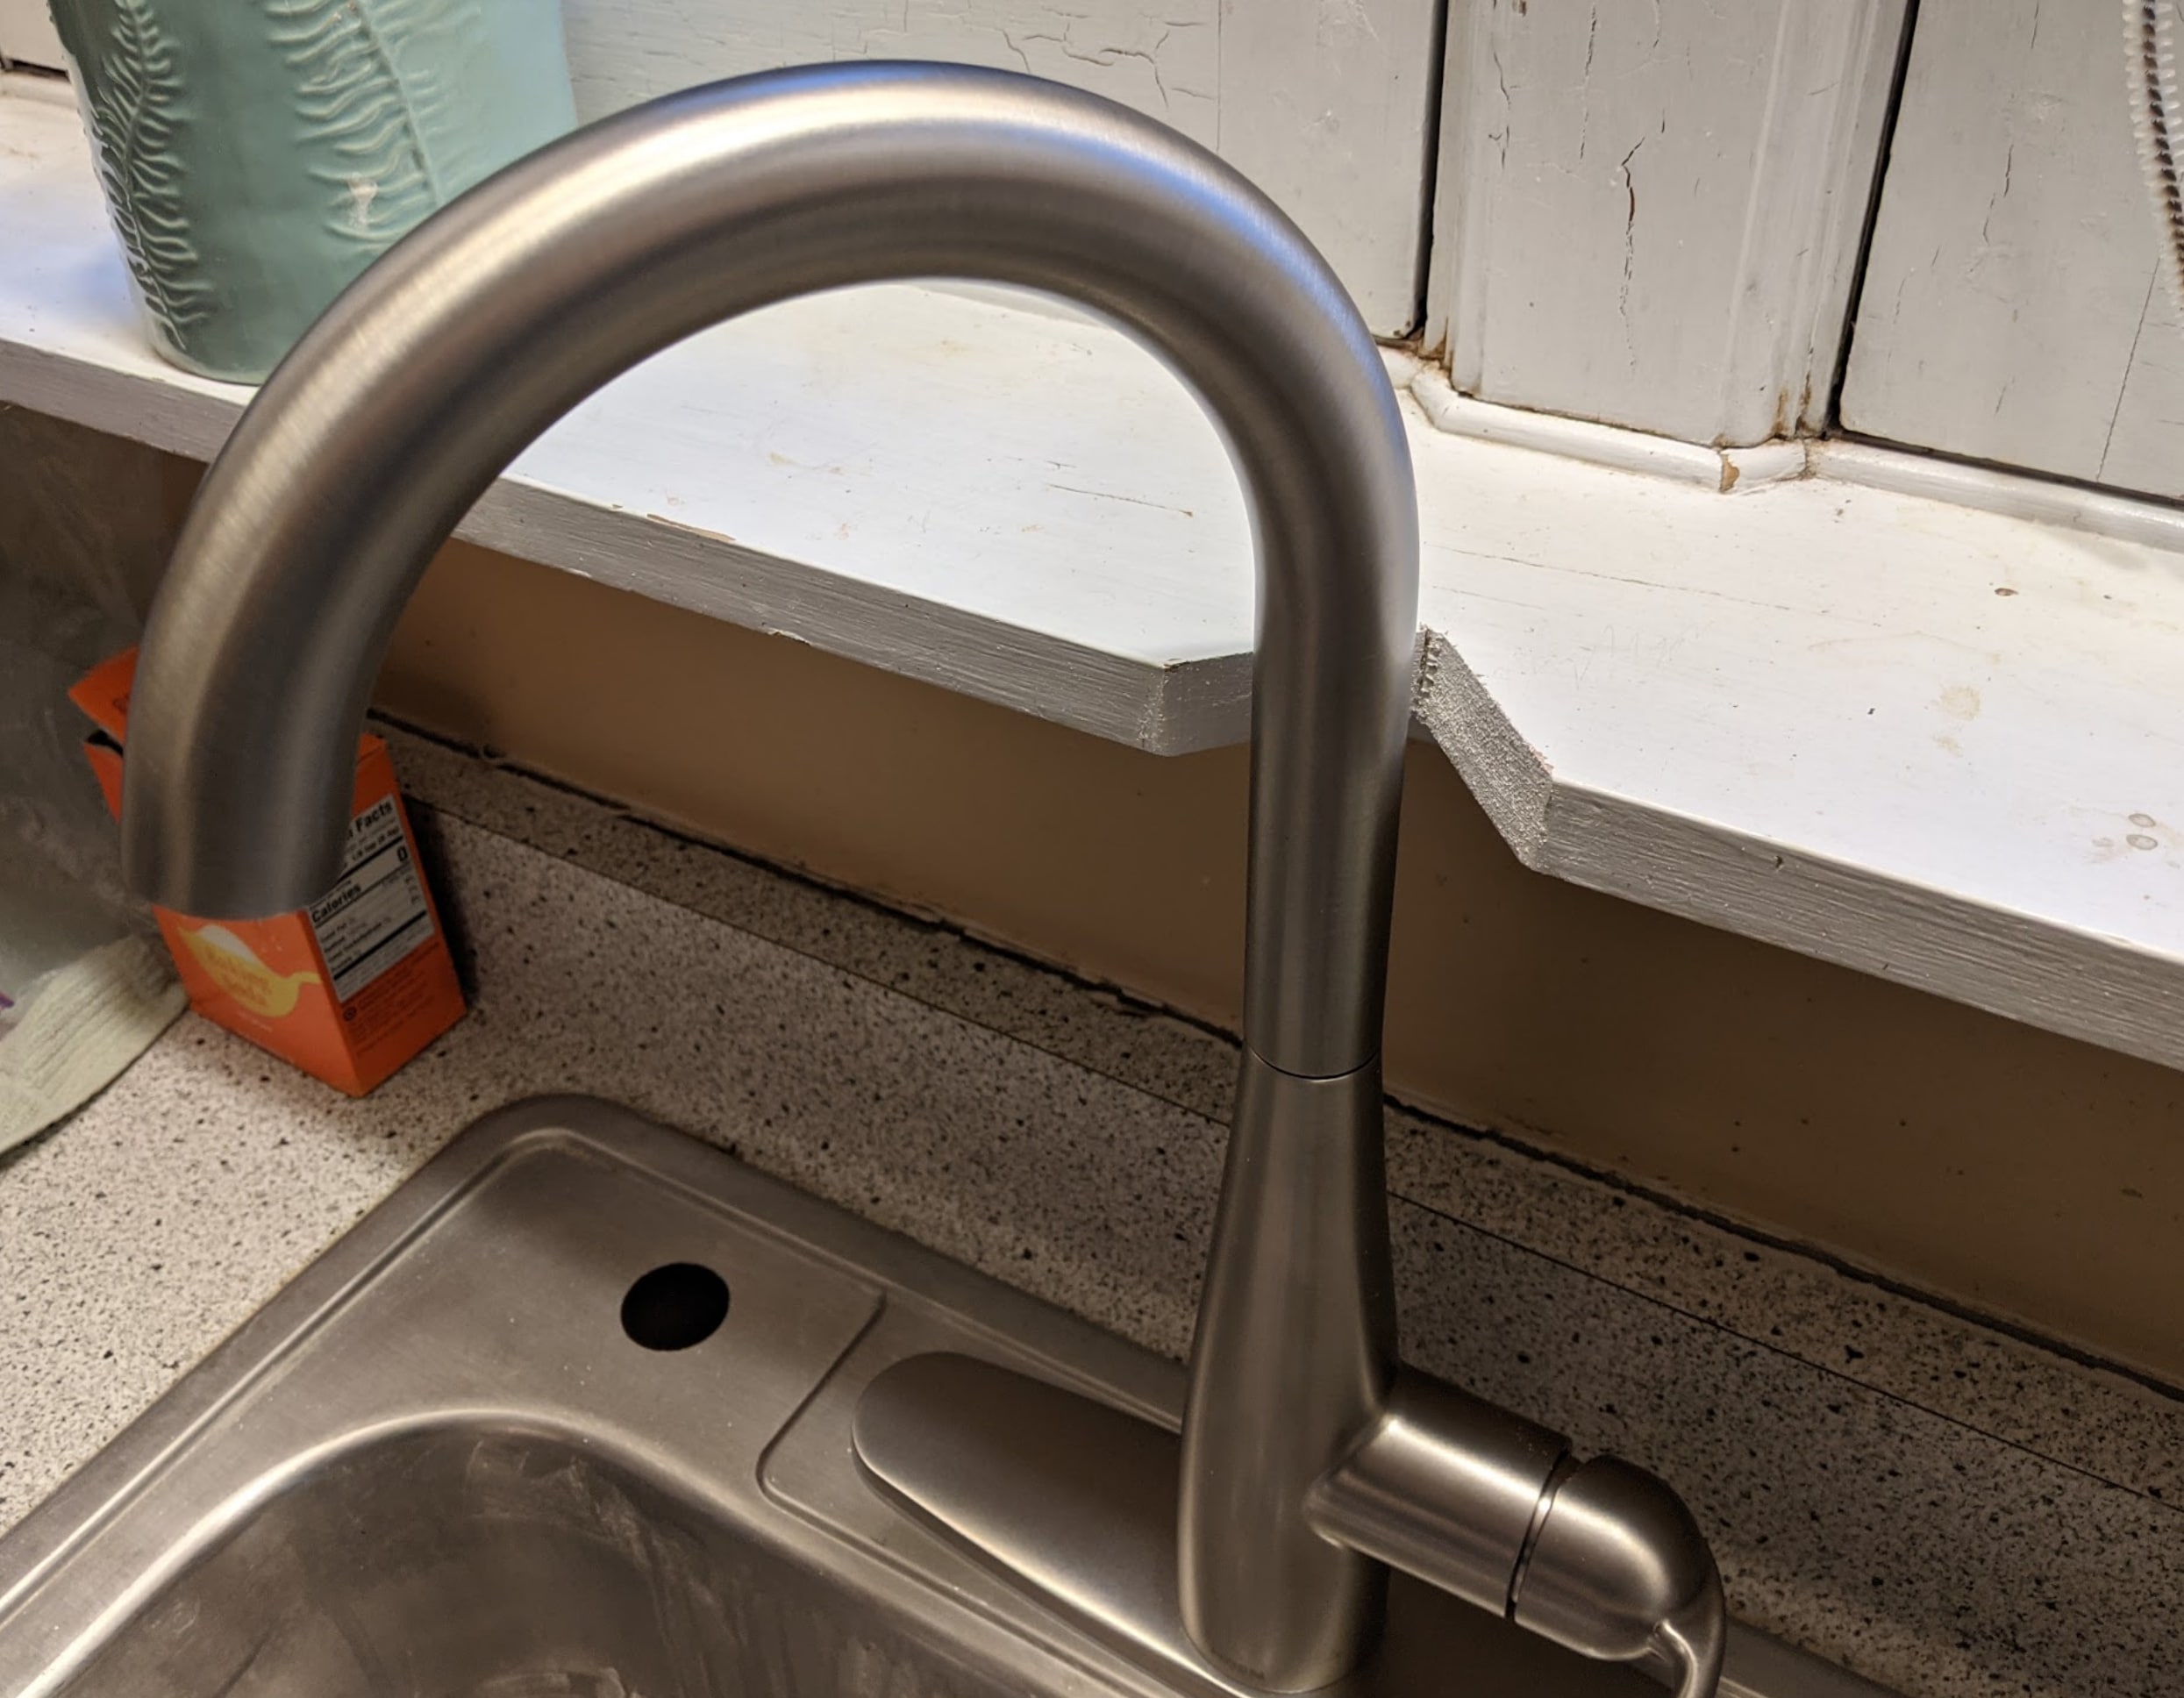 The kitchen faucet in place, with a notch cut into the shelf to make space.